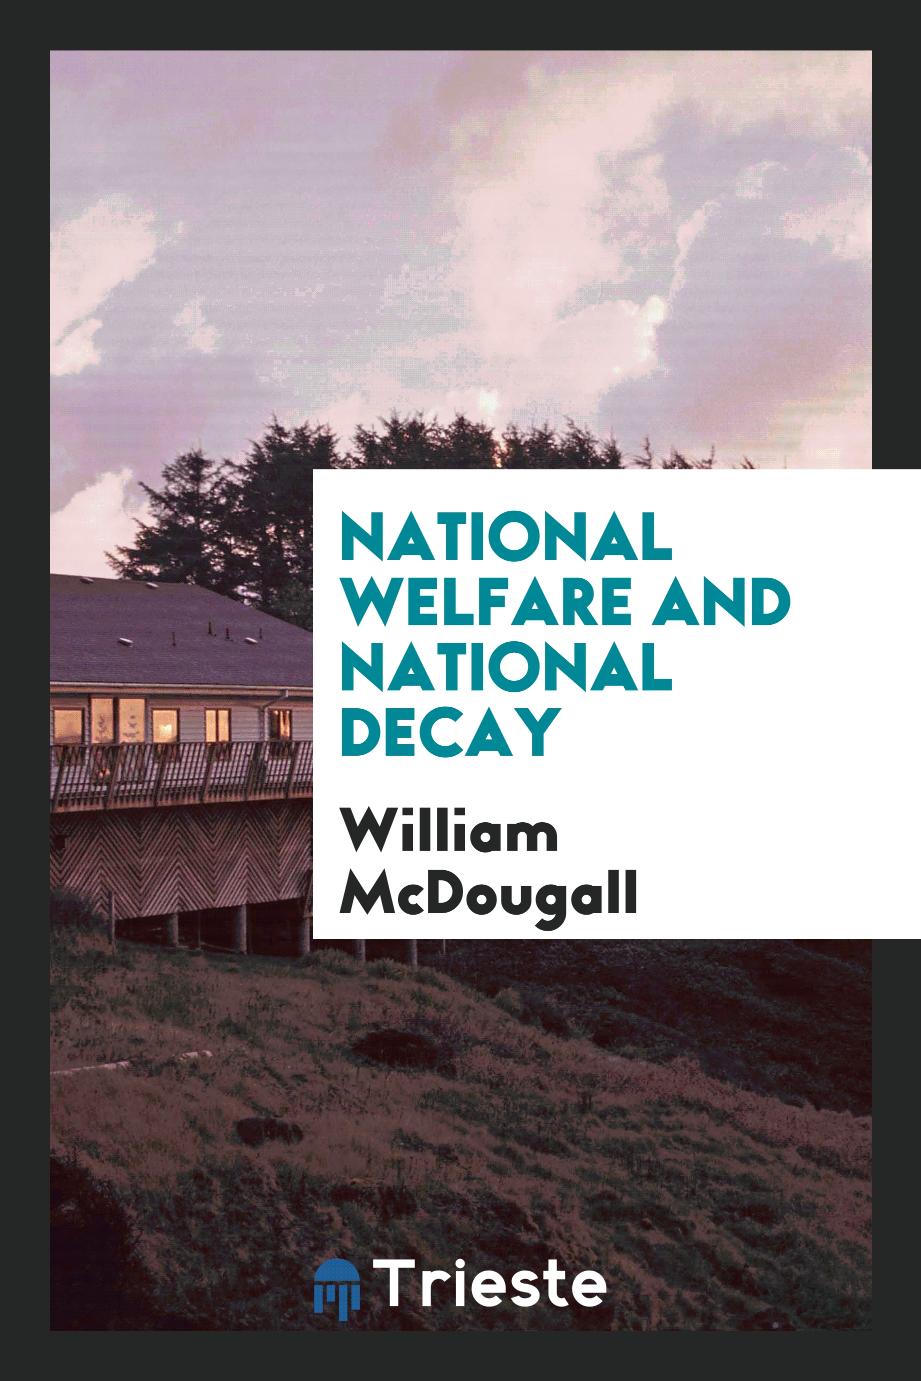 National welfare and national decay